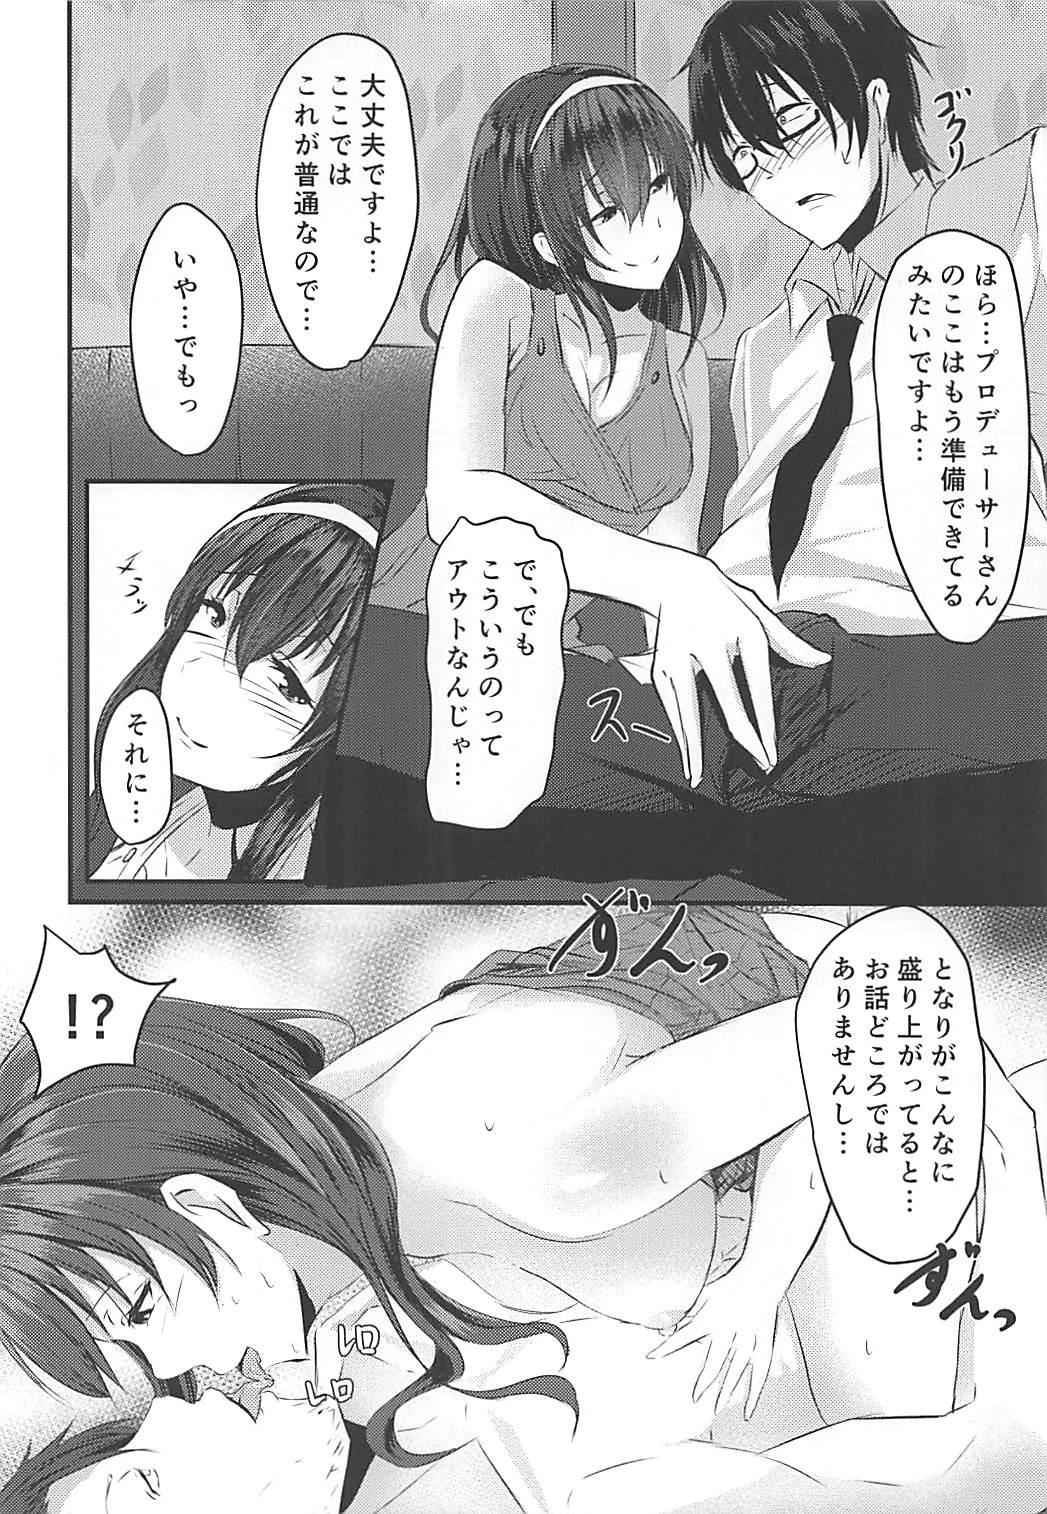 18 Year Old Porn Cinderella Club - The idolmaster Stepdaughter - Page 7